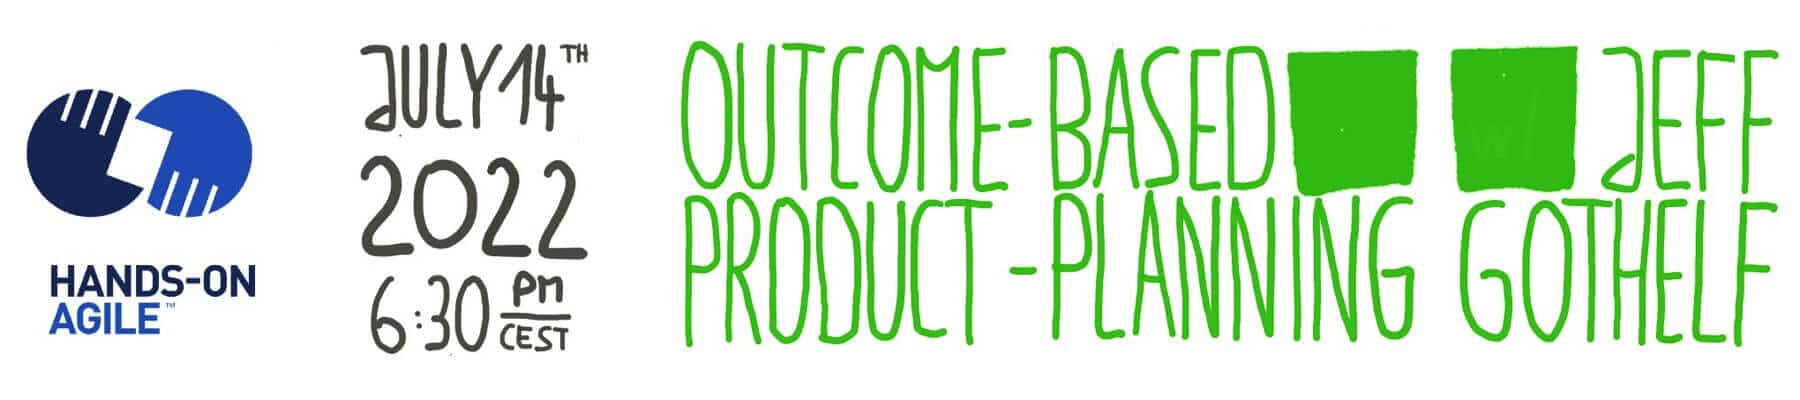 Hands-on Agile #43: Outcome-Based Product Planning mit Jeff Gothelf — Age-of-Product.com